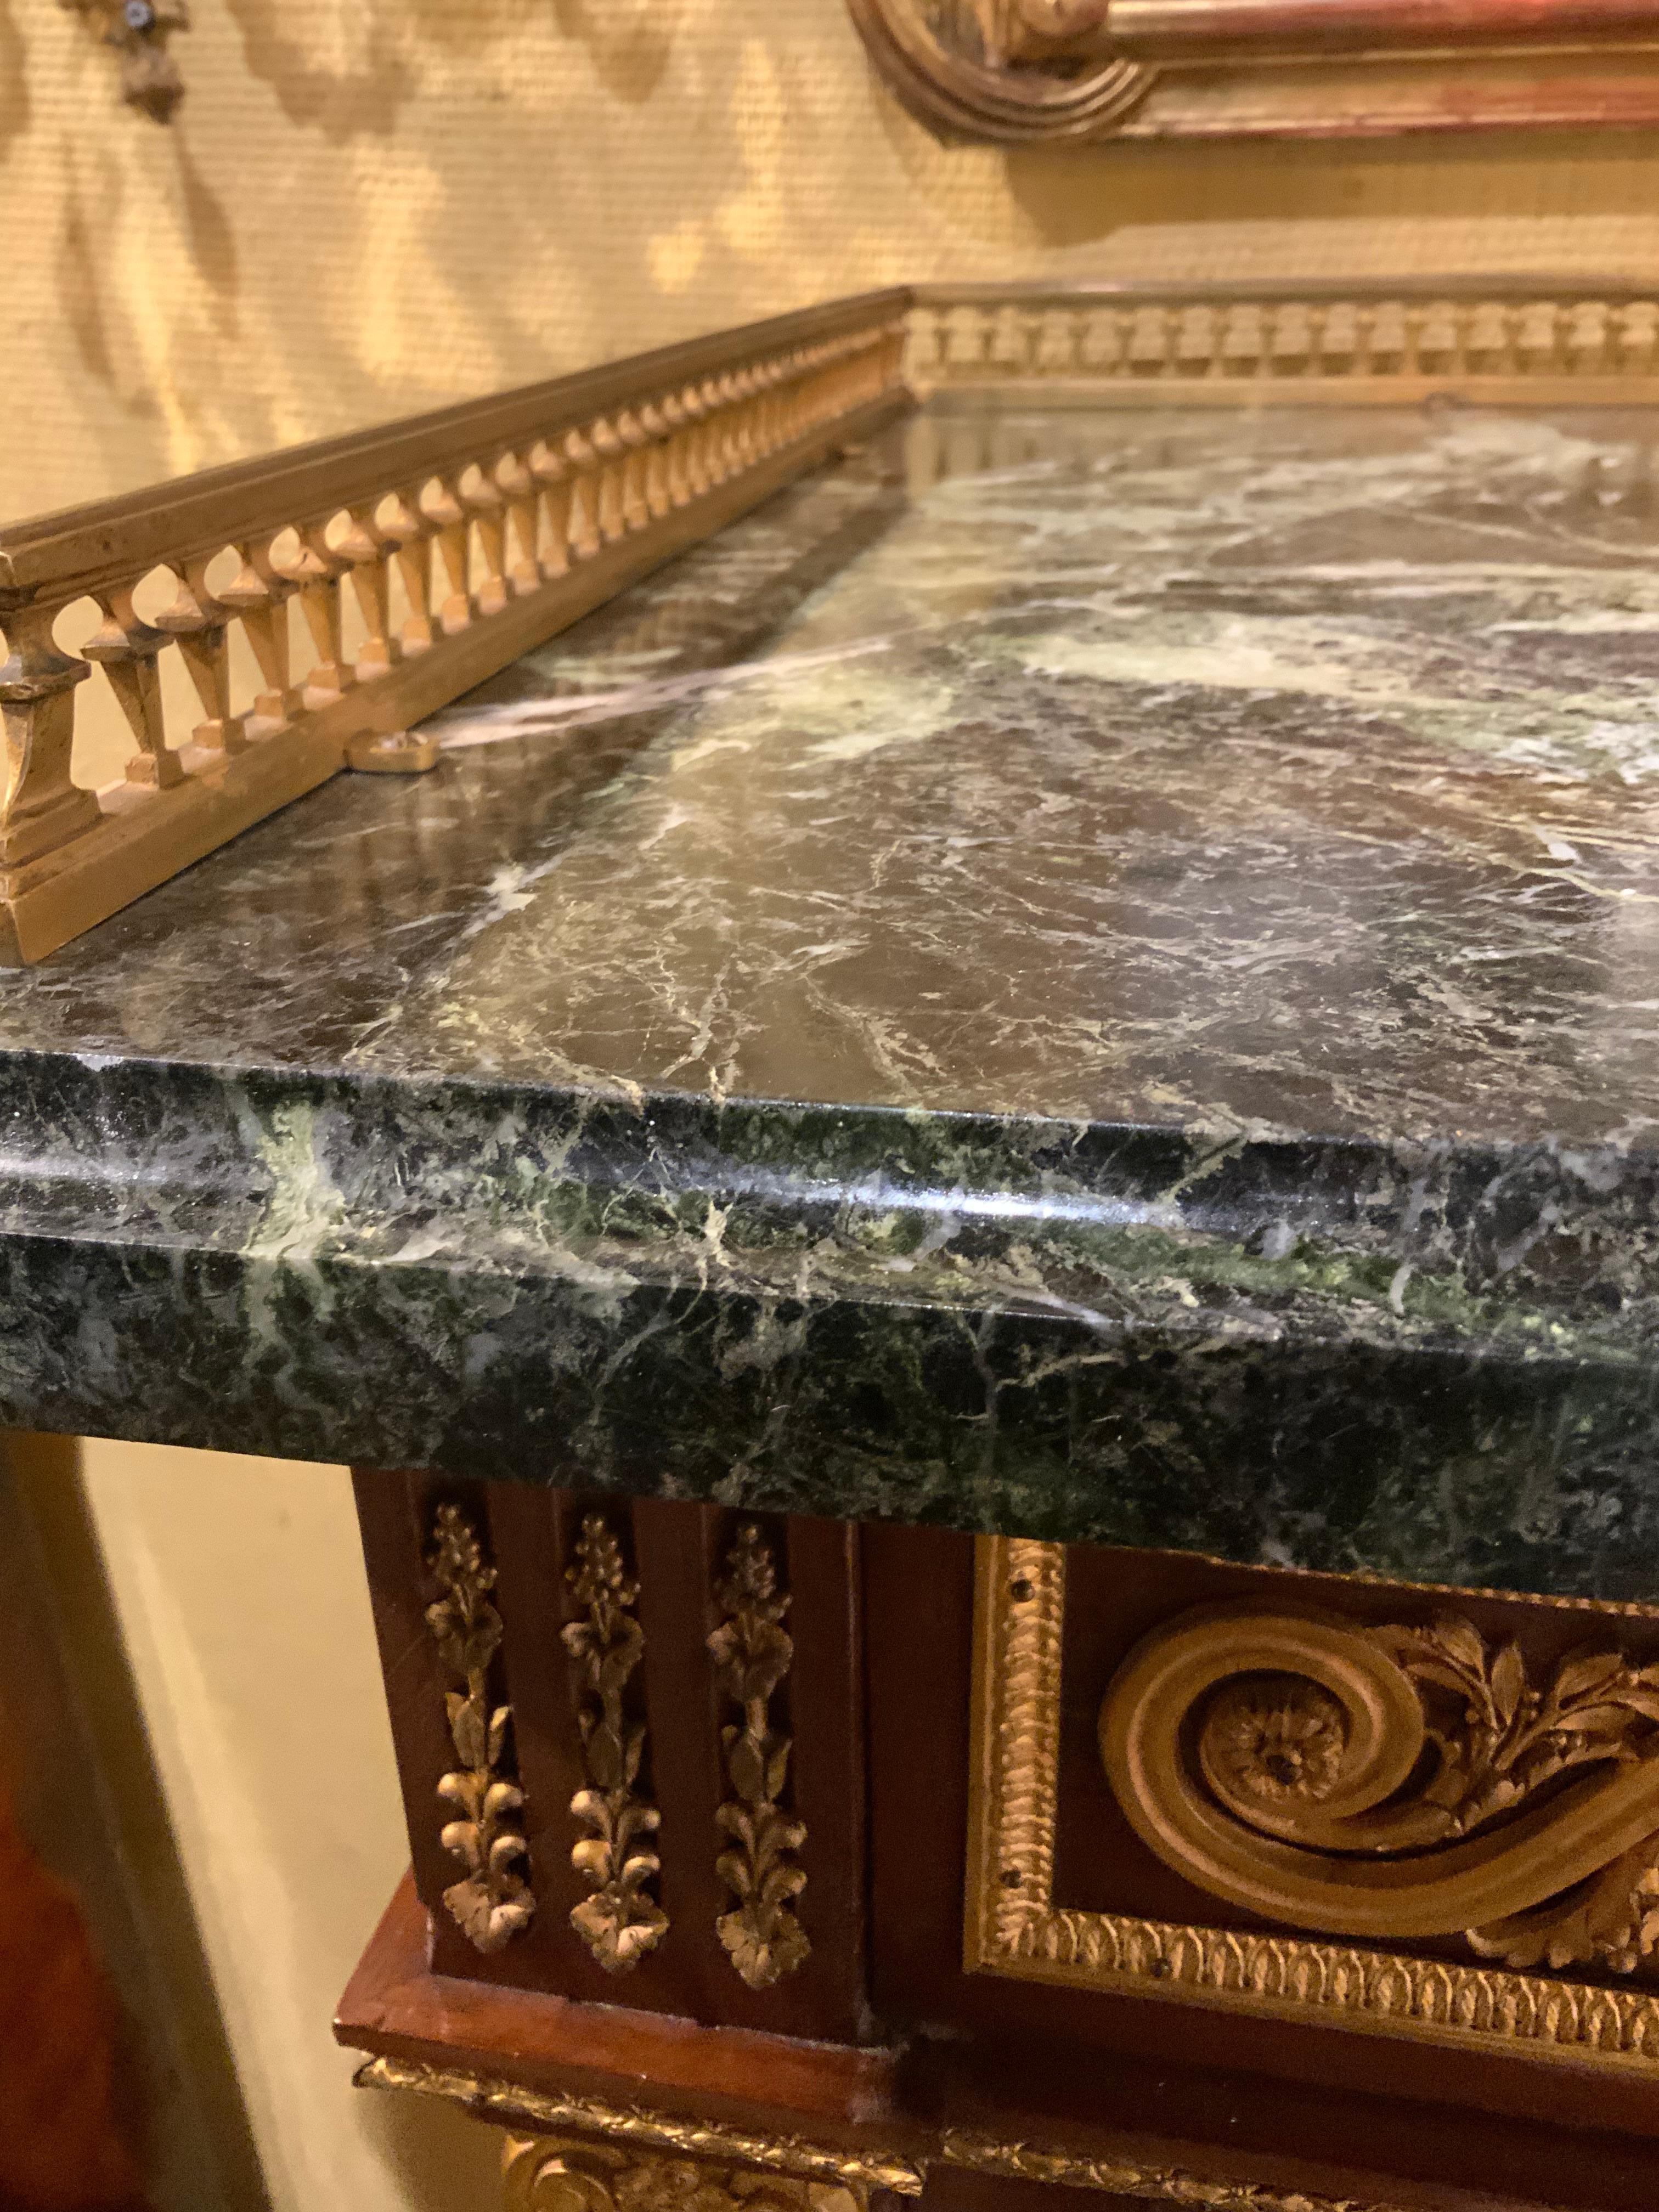 The exceptional cabinet work and the excellent bronze mounts
Make this piece special. It is made of mahogany and the
Workmanship is especially fine. It has a dark green marble top
With a gilt bronze gallery that runs down each side and